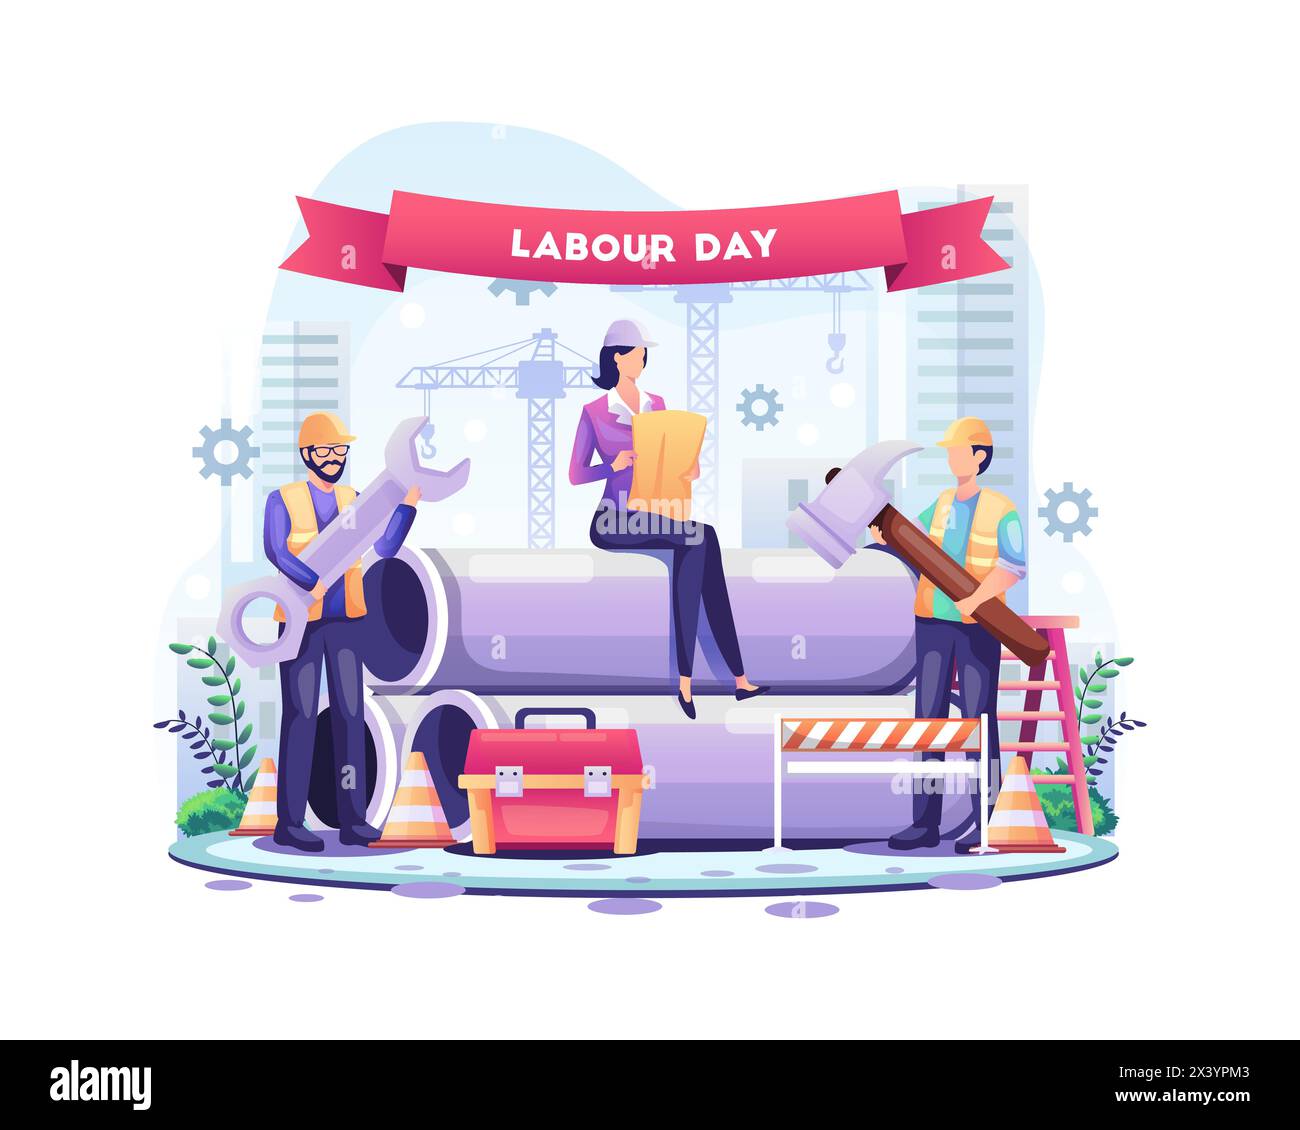 Happy Labour day. Construction workers are working on Labour Day On 1 May. vector illustration Stock Vector